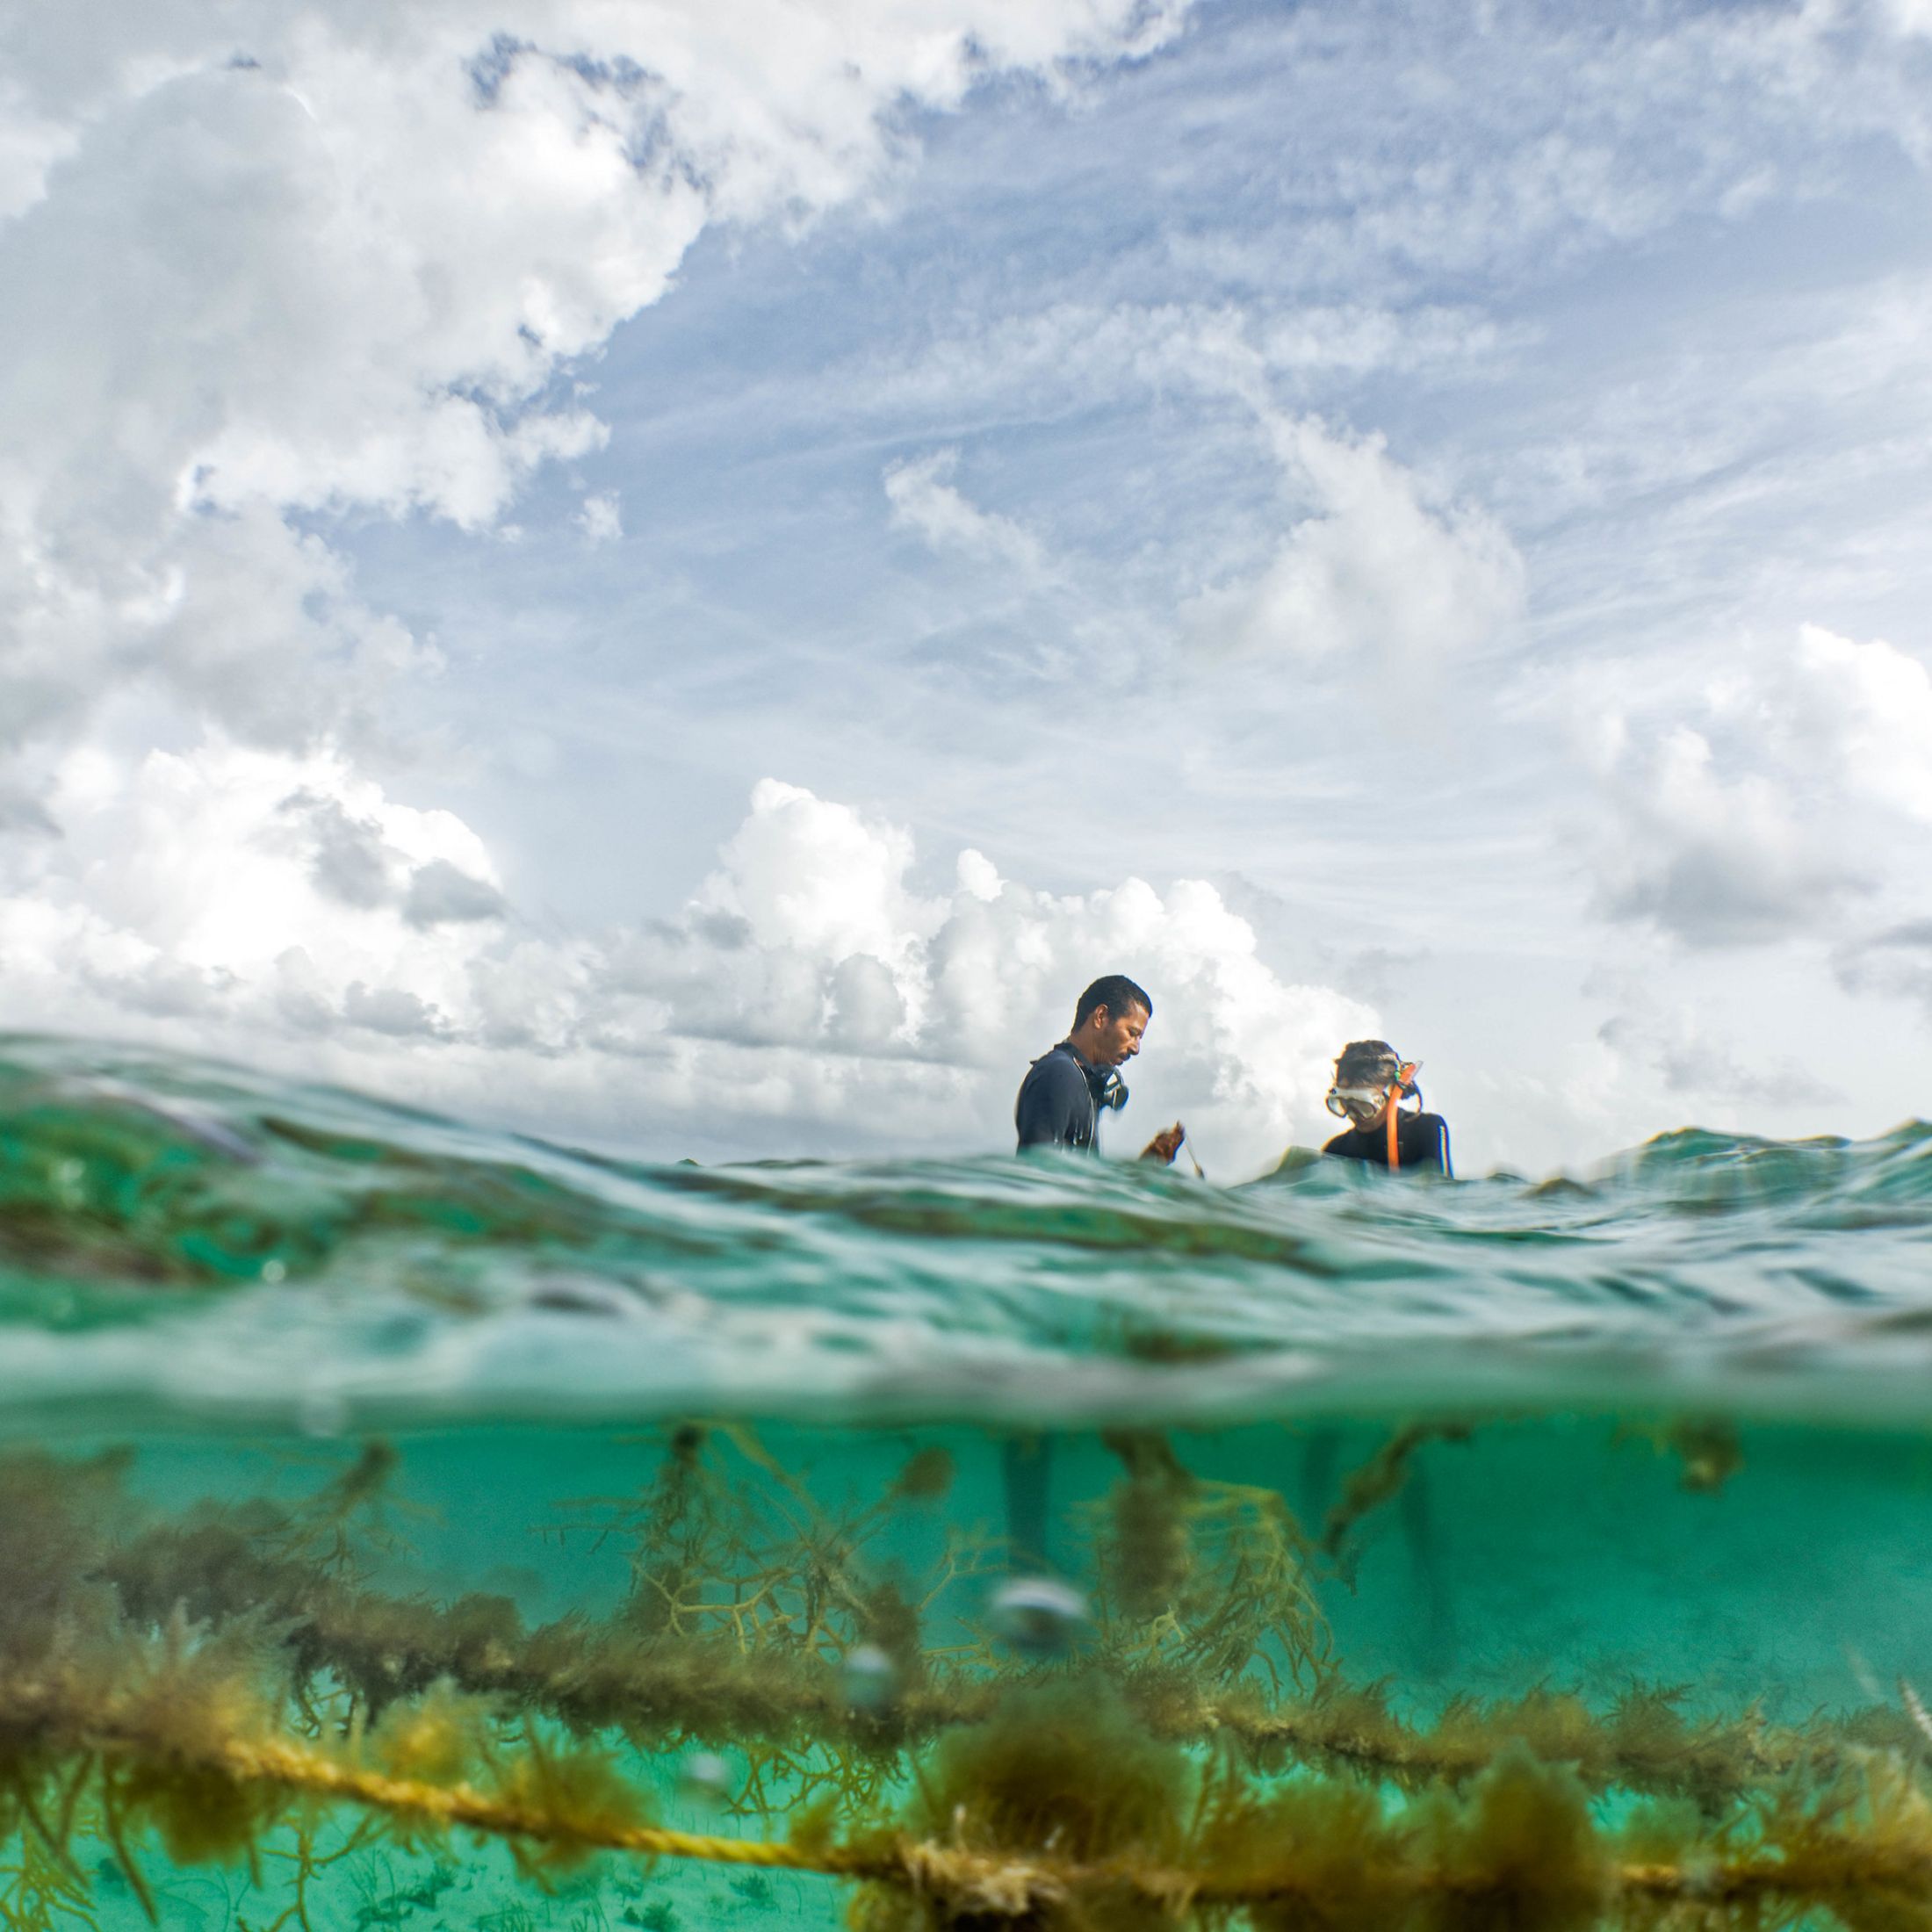 In this view from under and above water, two people in wetsuits harvest seaweed from the waters of Belize.